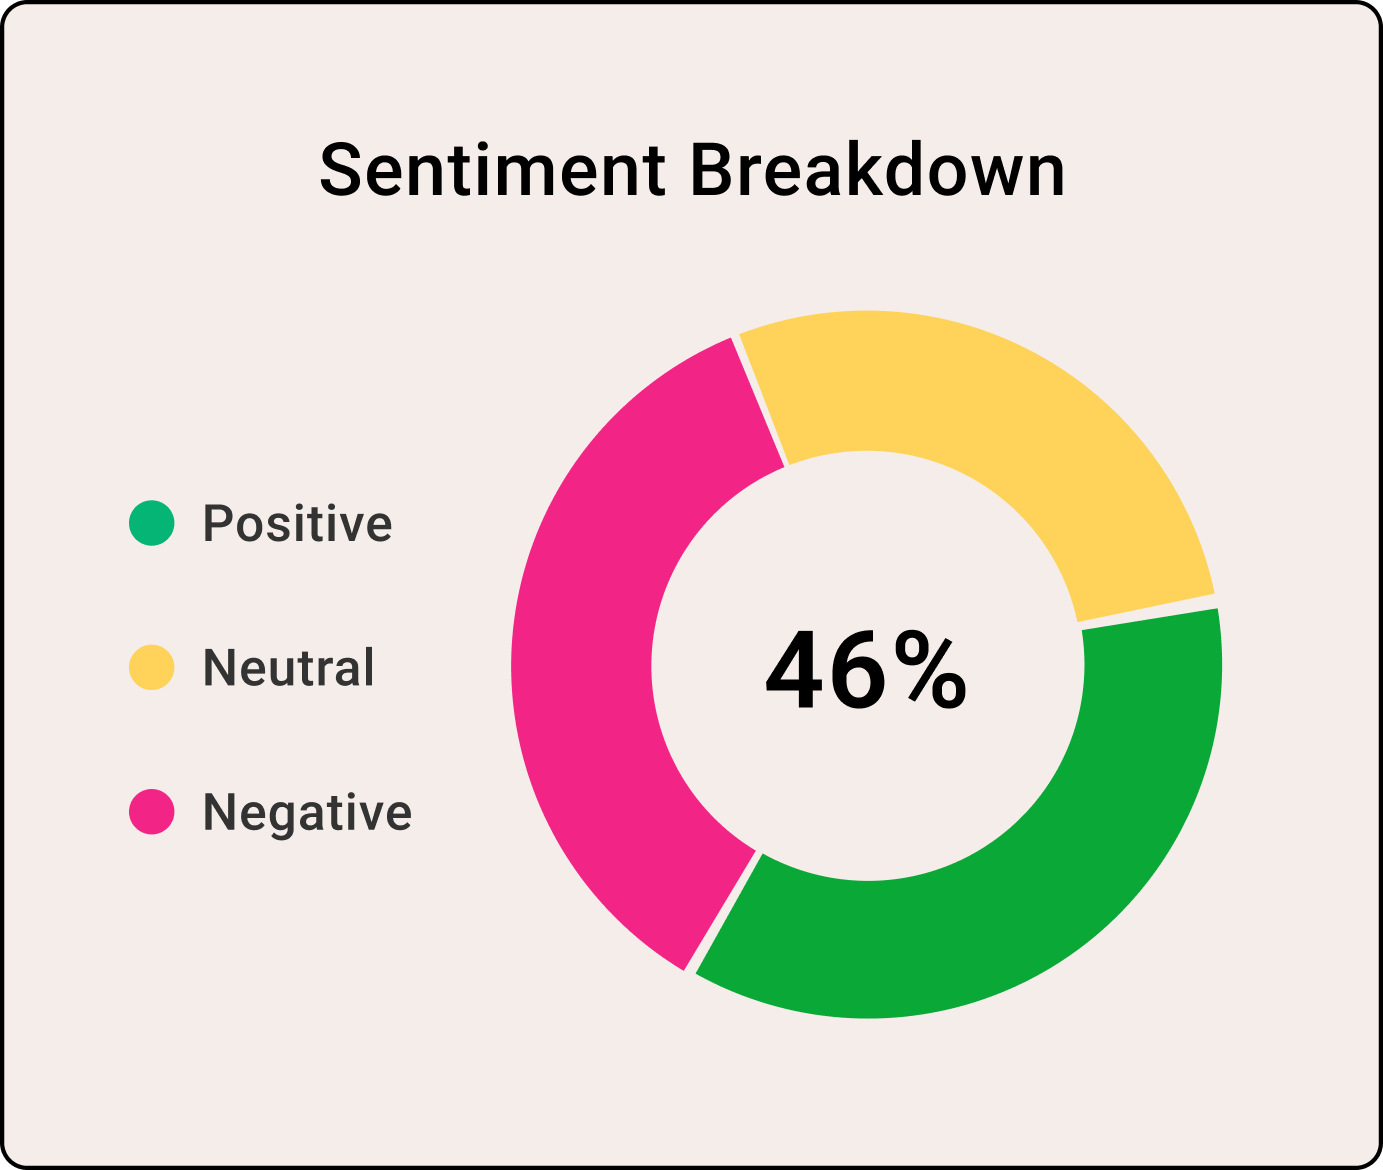 Idiomatic’s sentiment analysis online software